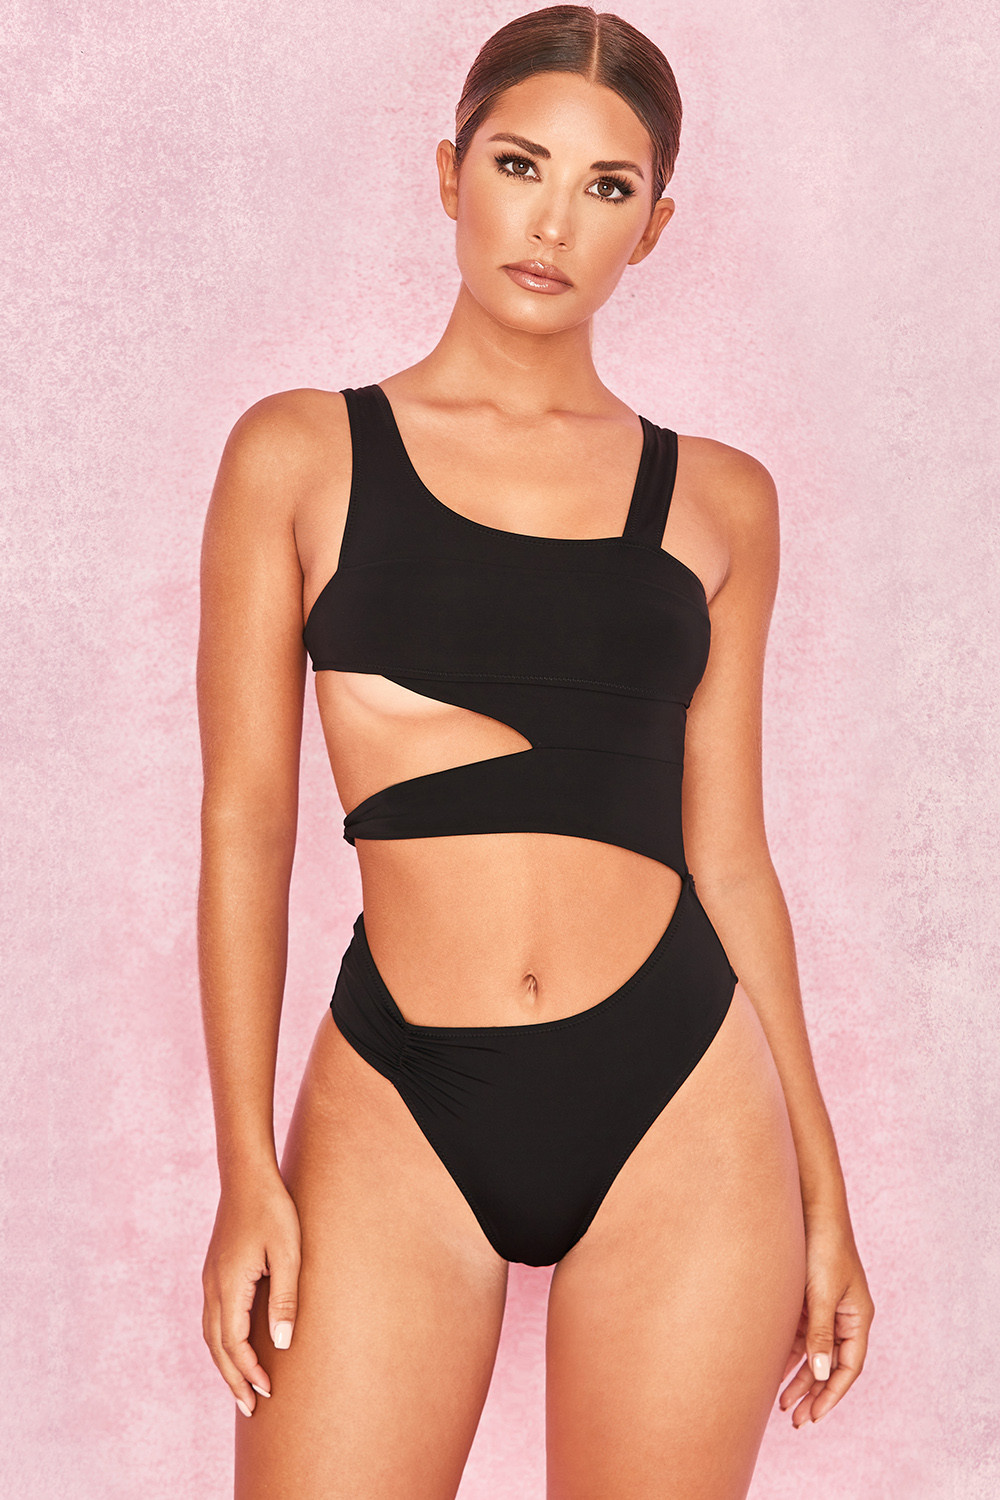 'Arabia' Black Wrapover Cut Out Swimsuit One Piece